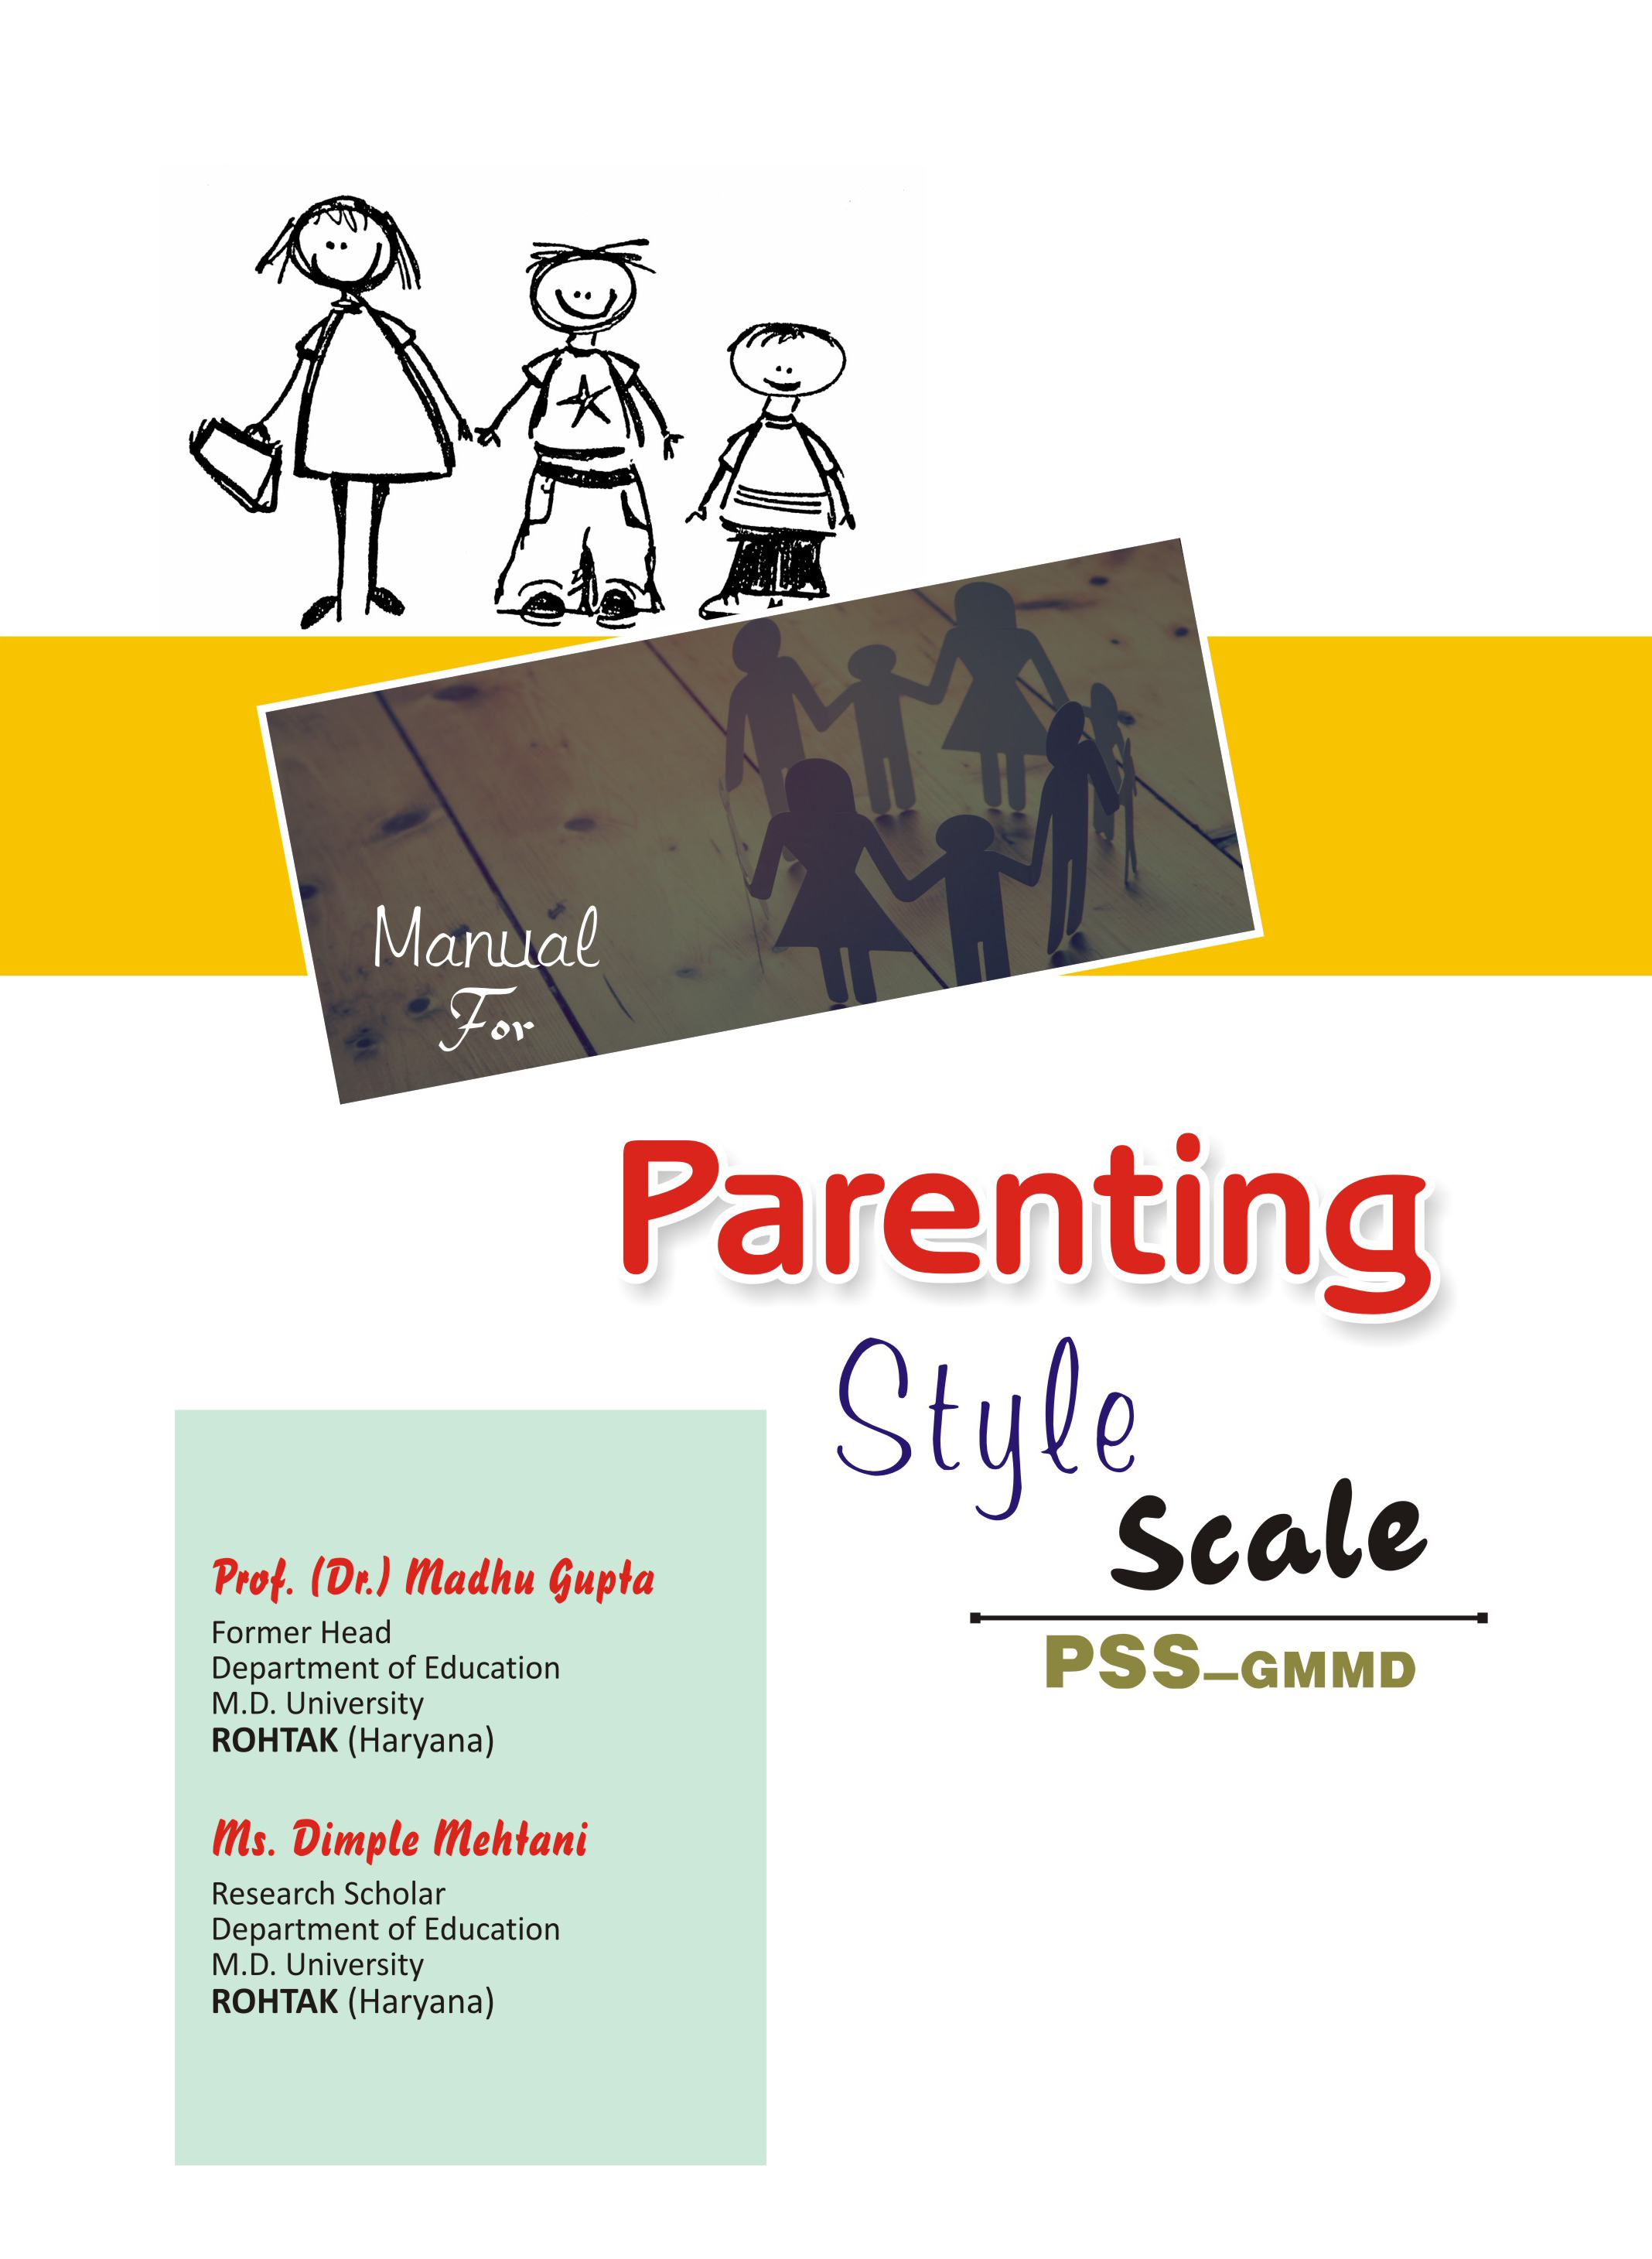 PARENTING-STYLE-SCALE